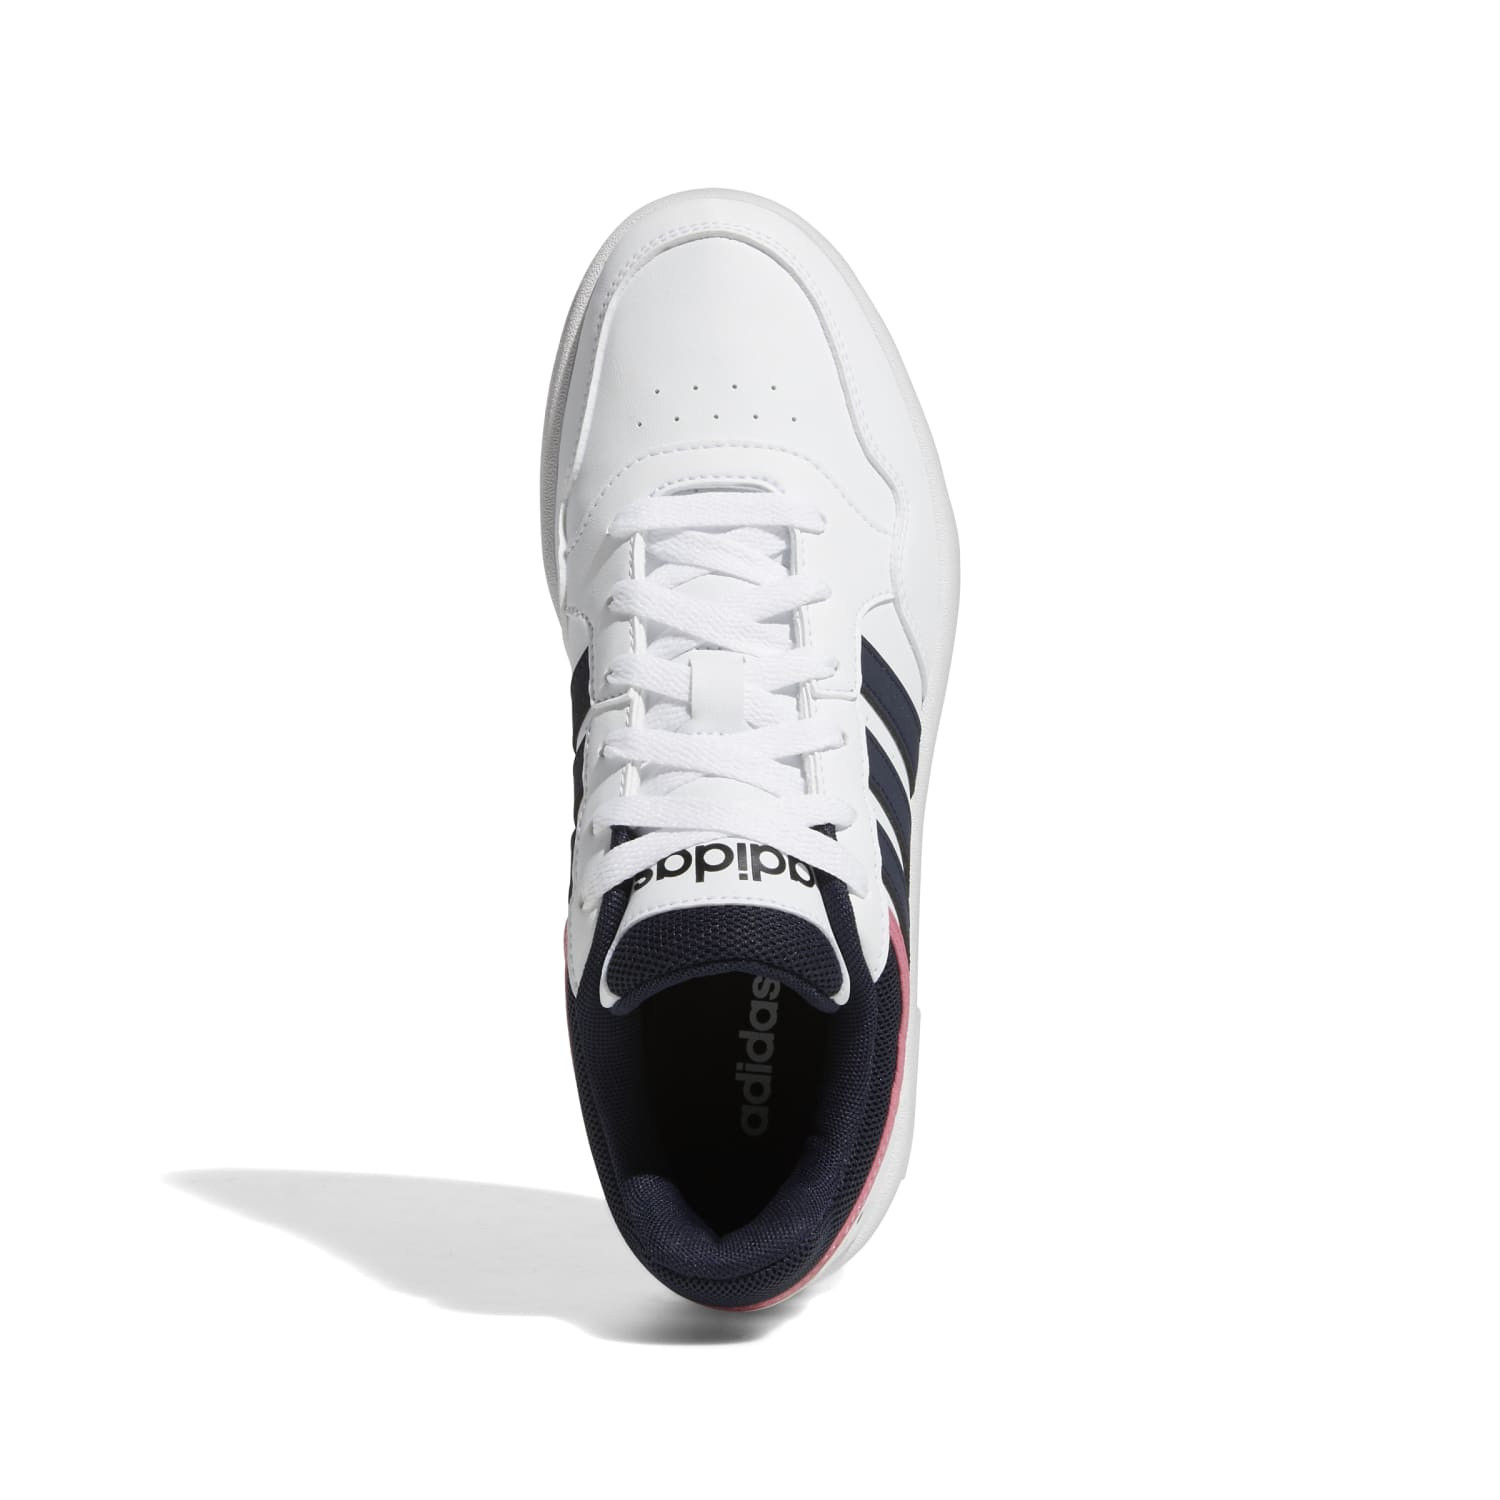 Adidas - Scarpe Hoops 3.0 Low Classic, Bianco, large image number 2